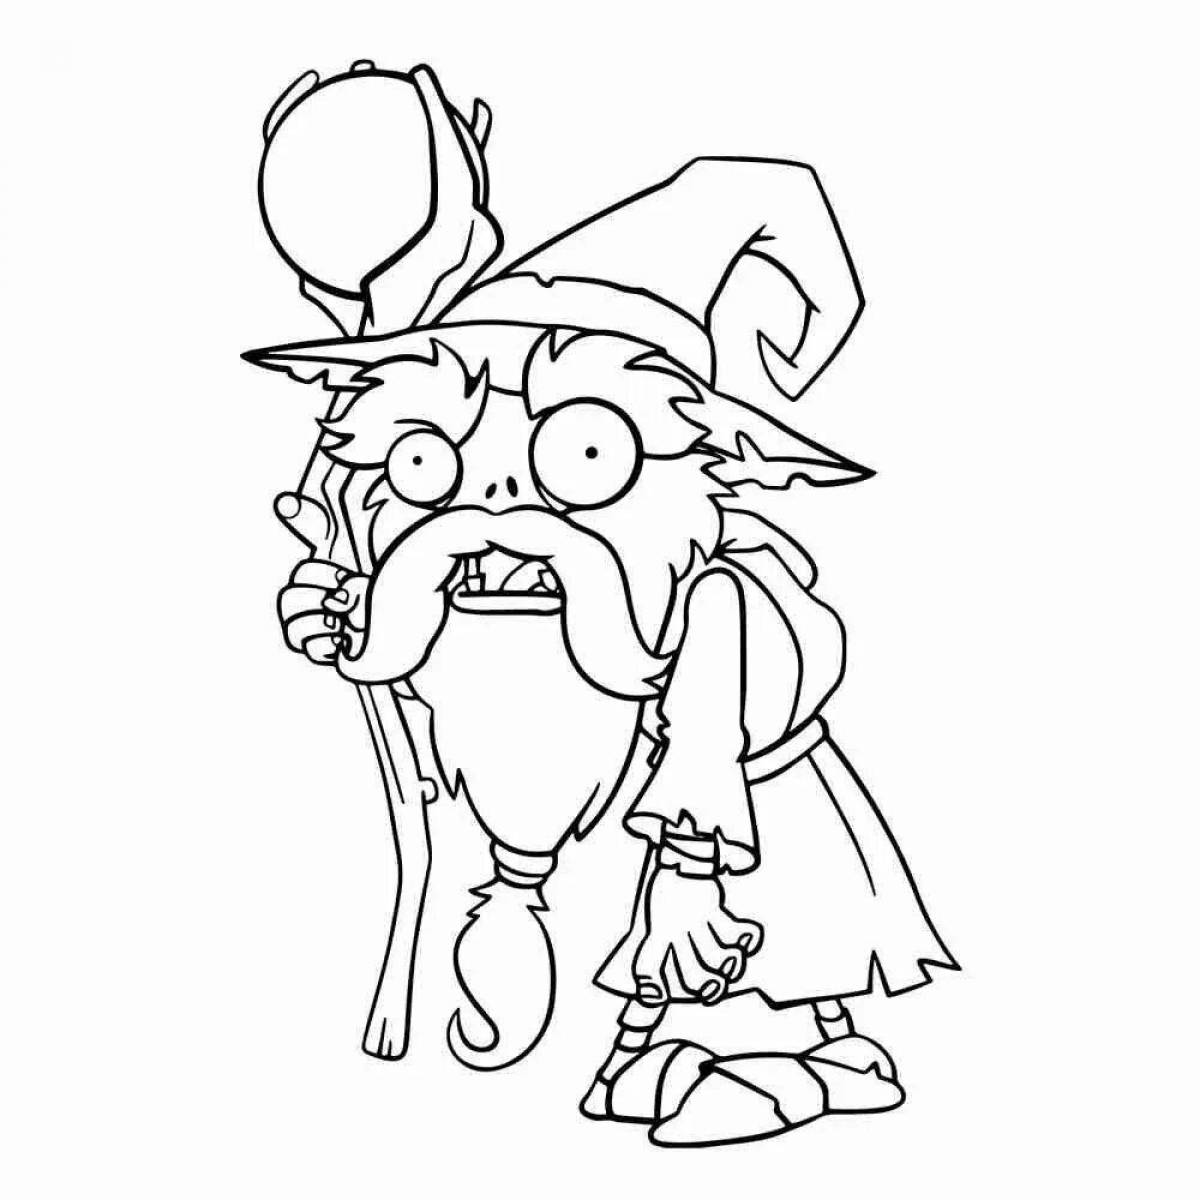 Coloring page disgusting zombies vs 2